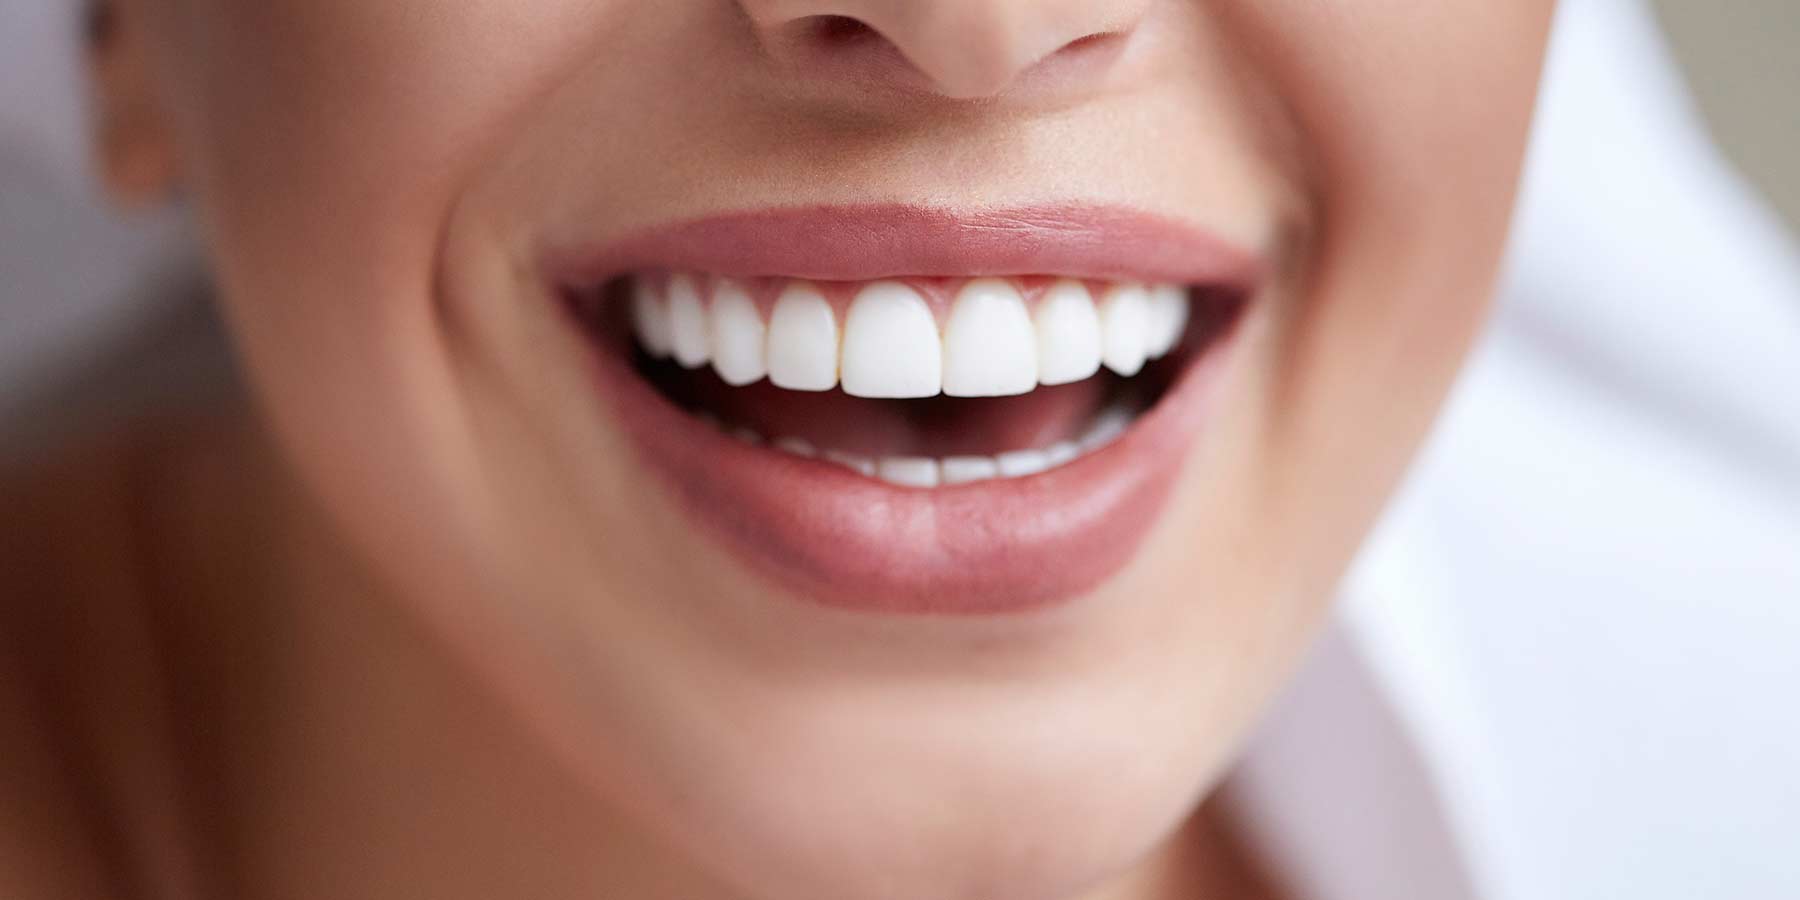 The Benefits of Cosmetic Dentistry